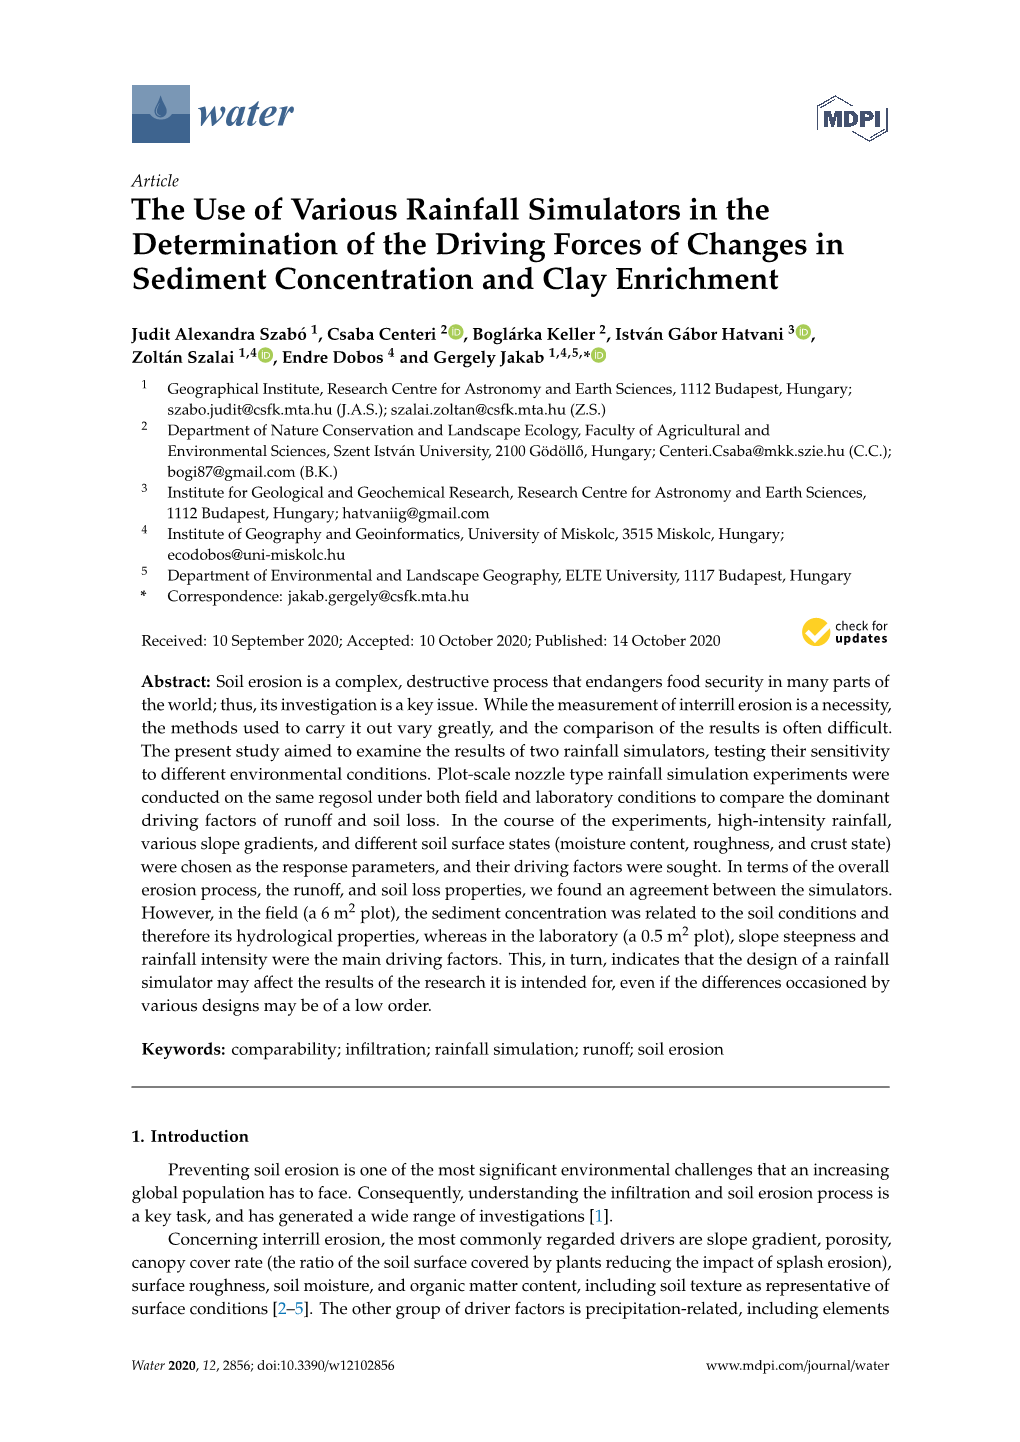 The Use of Various Rainfall Simulators in the Determination of the Driving Forces of Changes in Sediment Concentration and Clay Enrichment